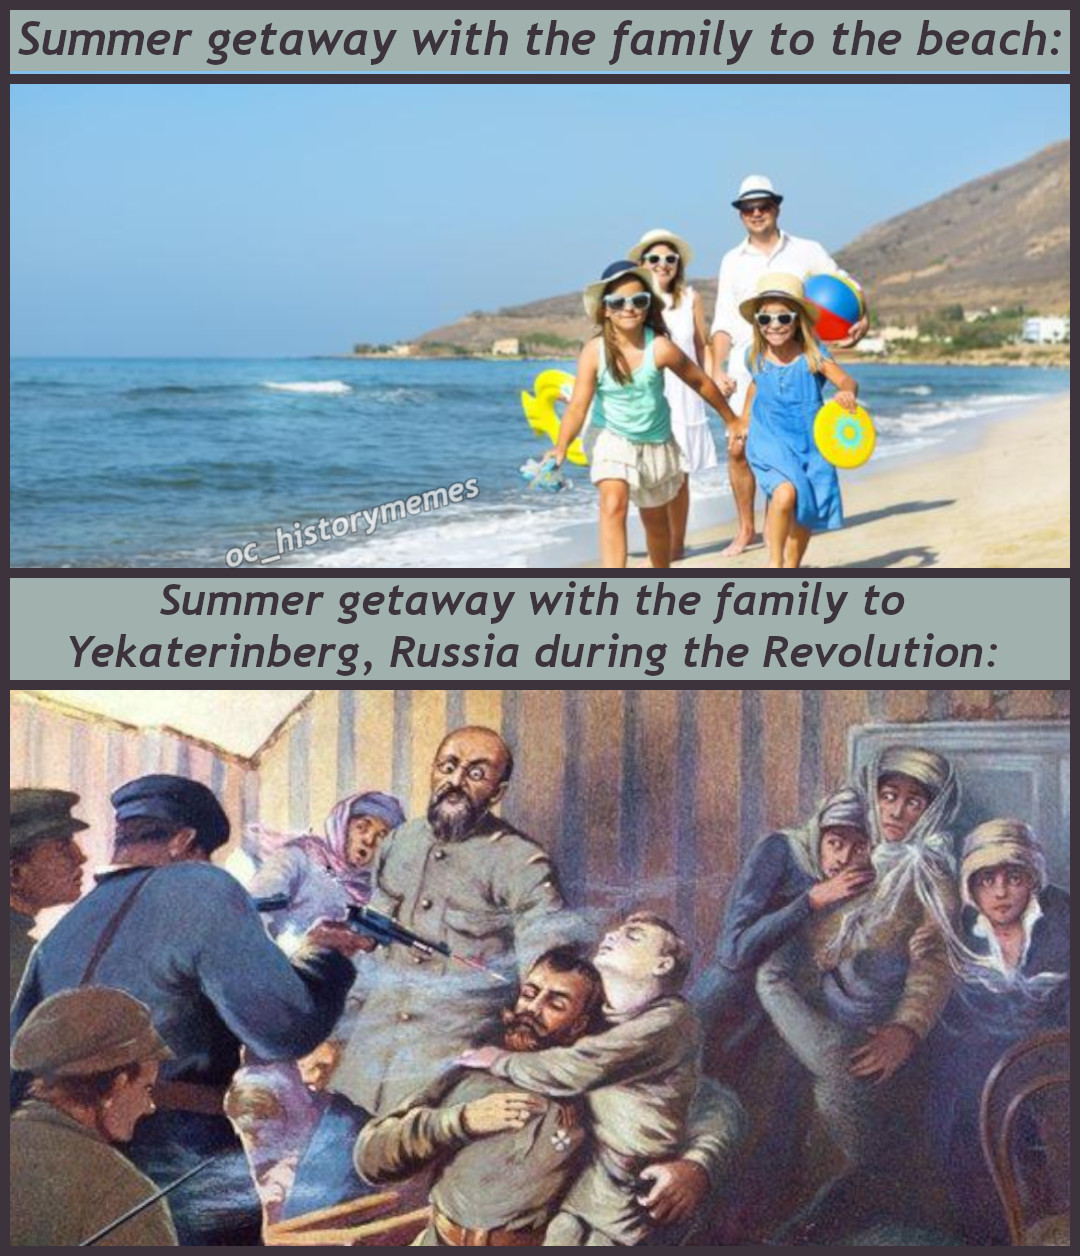 Summer getaway with the family to the beach Oc_historymemes Summer getaway with the family to Yekaterinberg, Russia during the Revolution